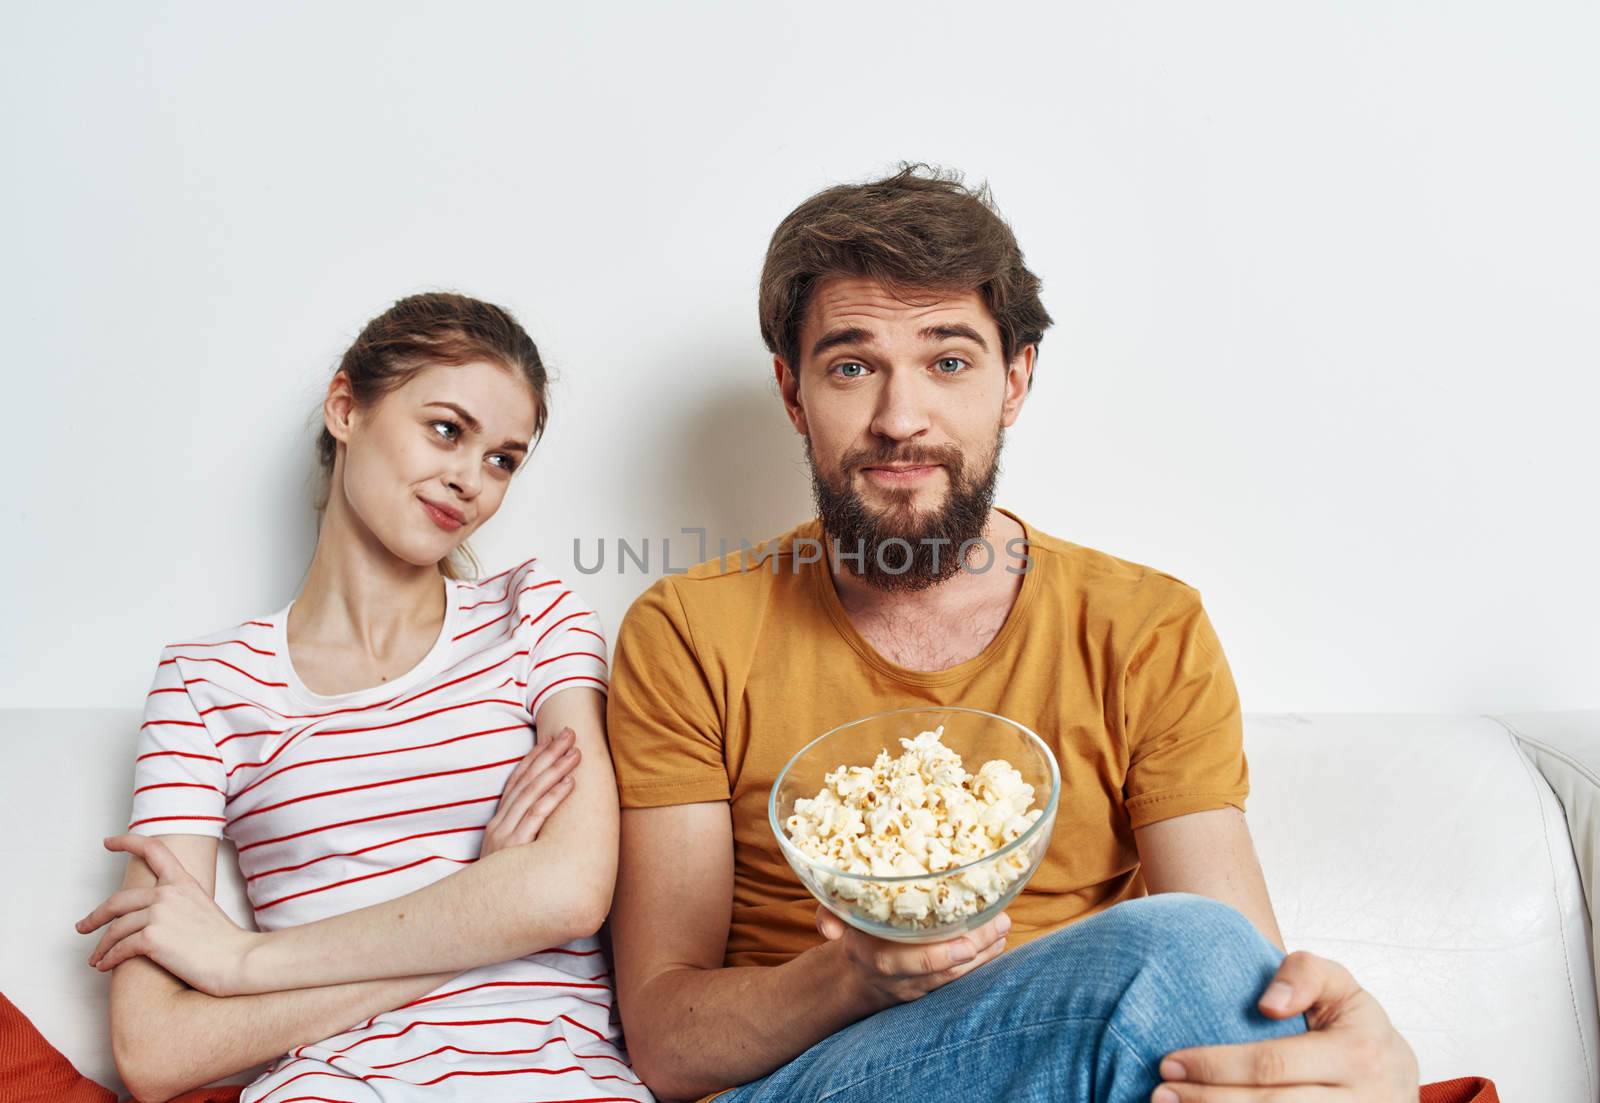 Man and woman on the couch with popcorn watching TV shows. High quality photo